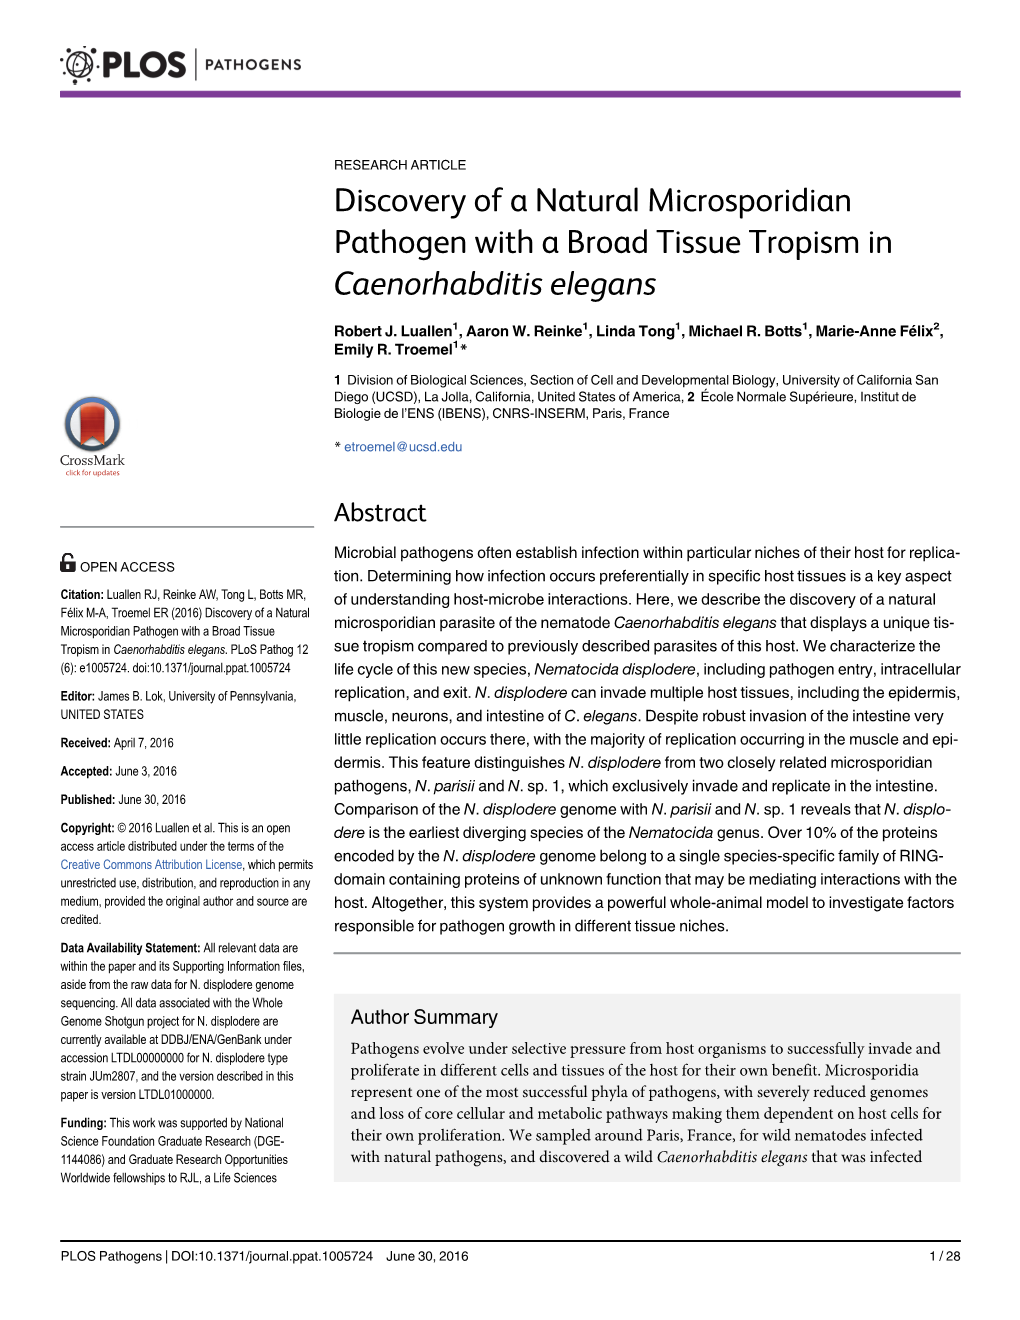 Discovery of a Natural Microsporidian Pathogen with a Broad Tissue Tropism in Caenorhabditis Elegans